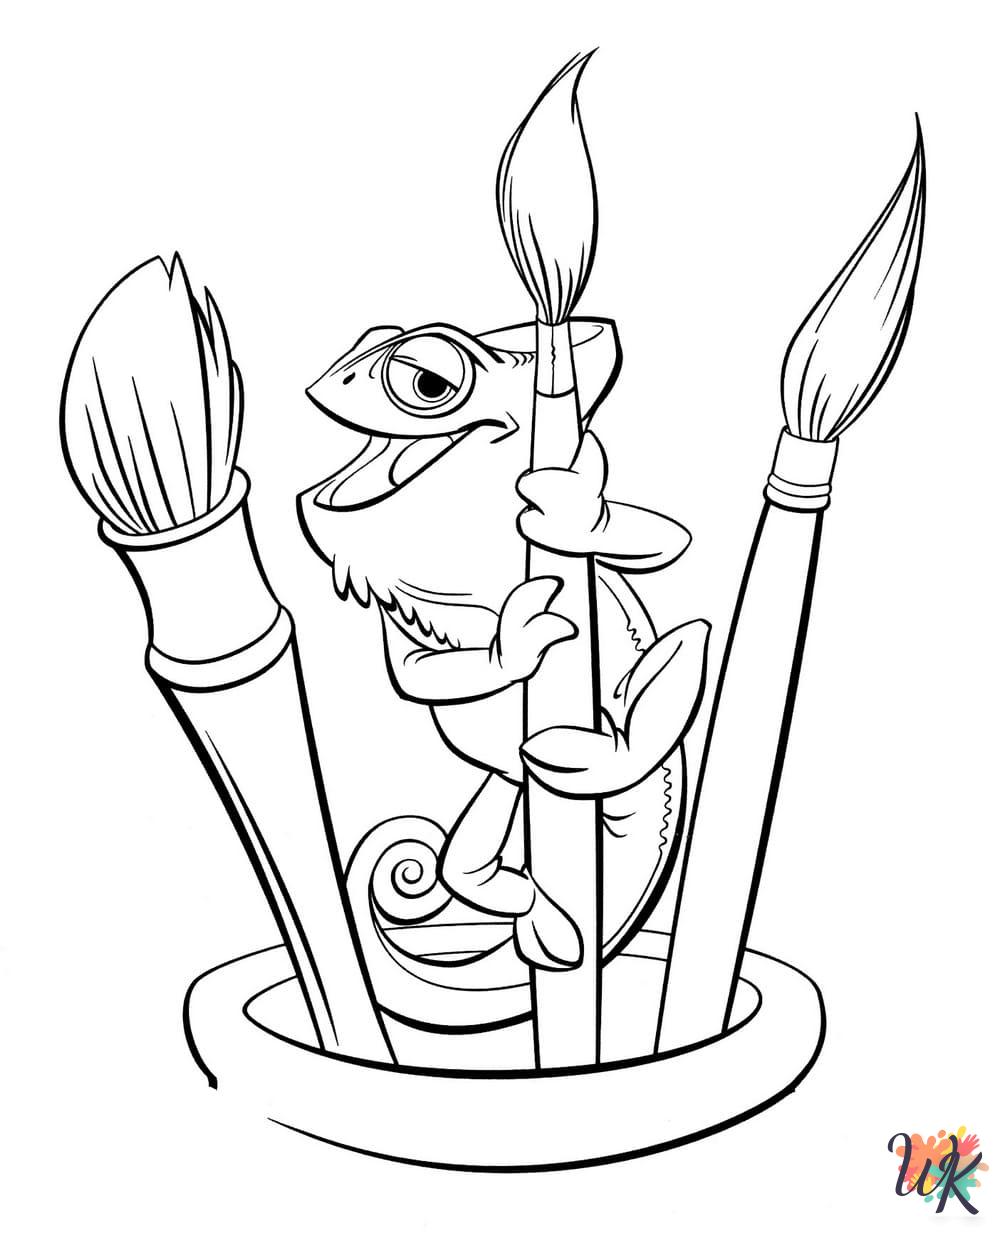 Tangled coloring pages free